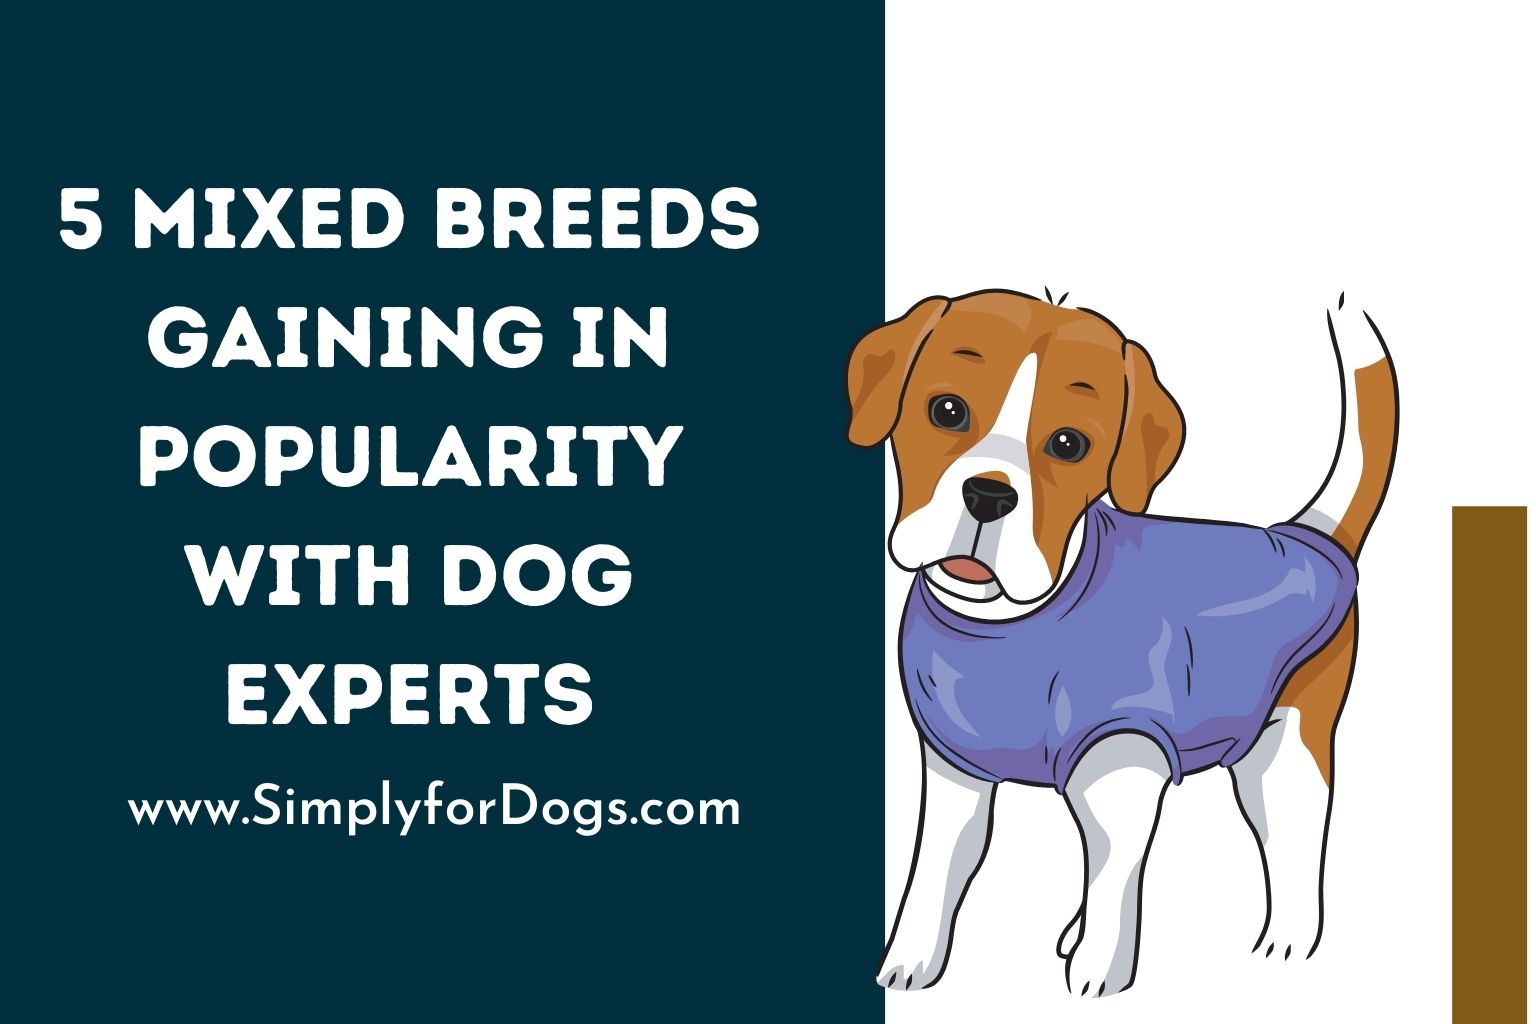 5 Mixed Breeds Gaining in Popularity with Dog Experts